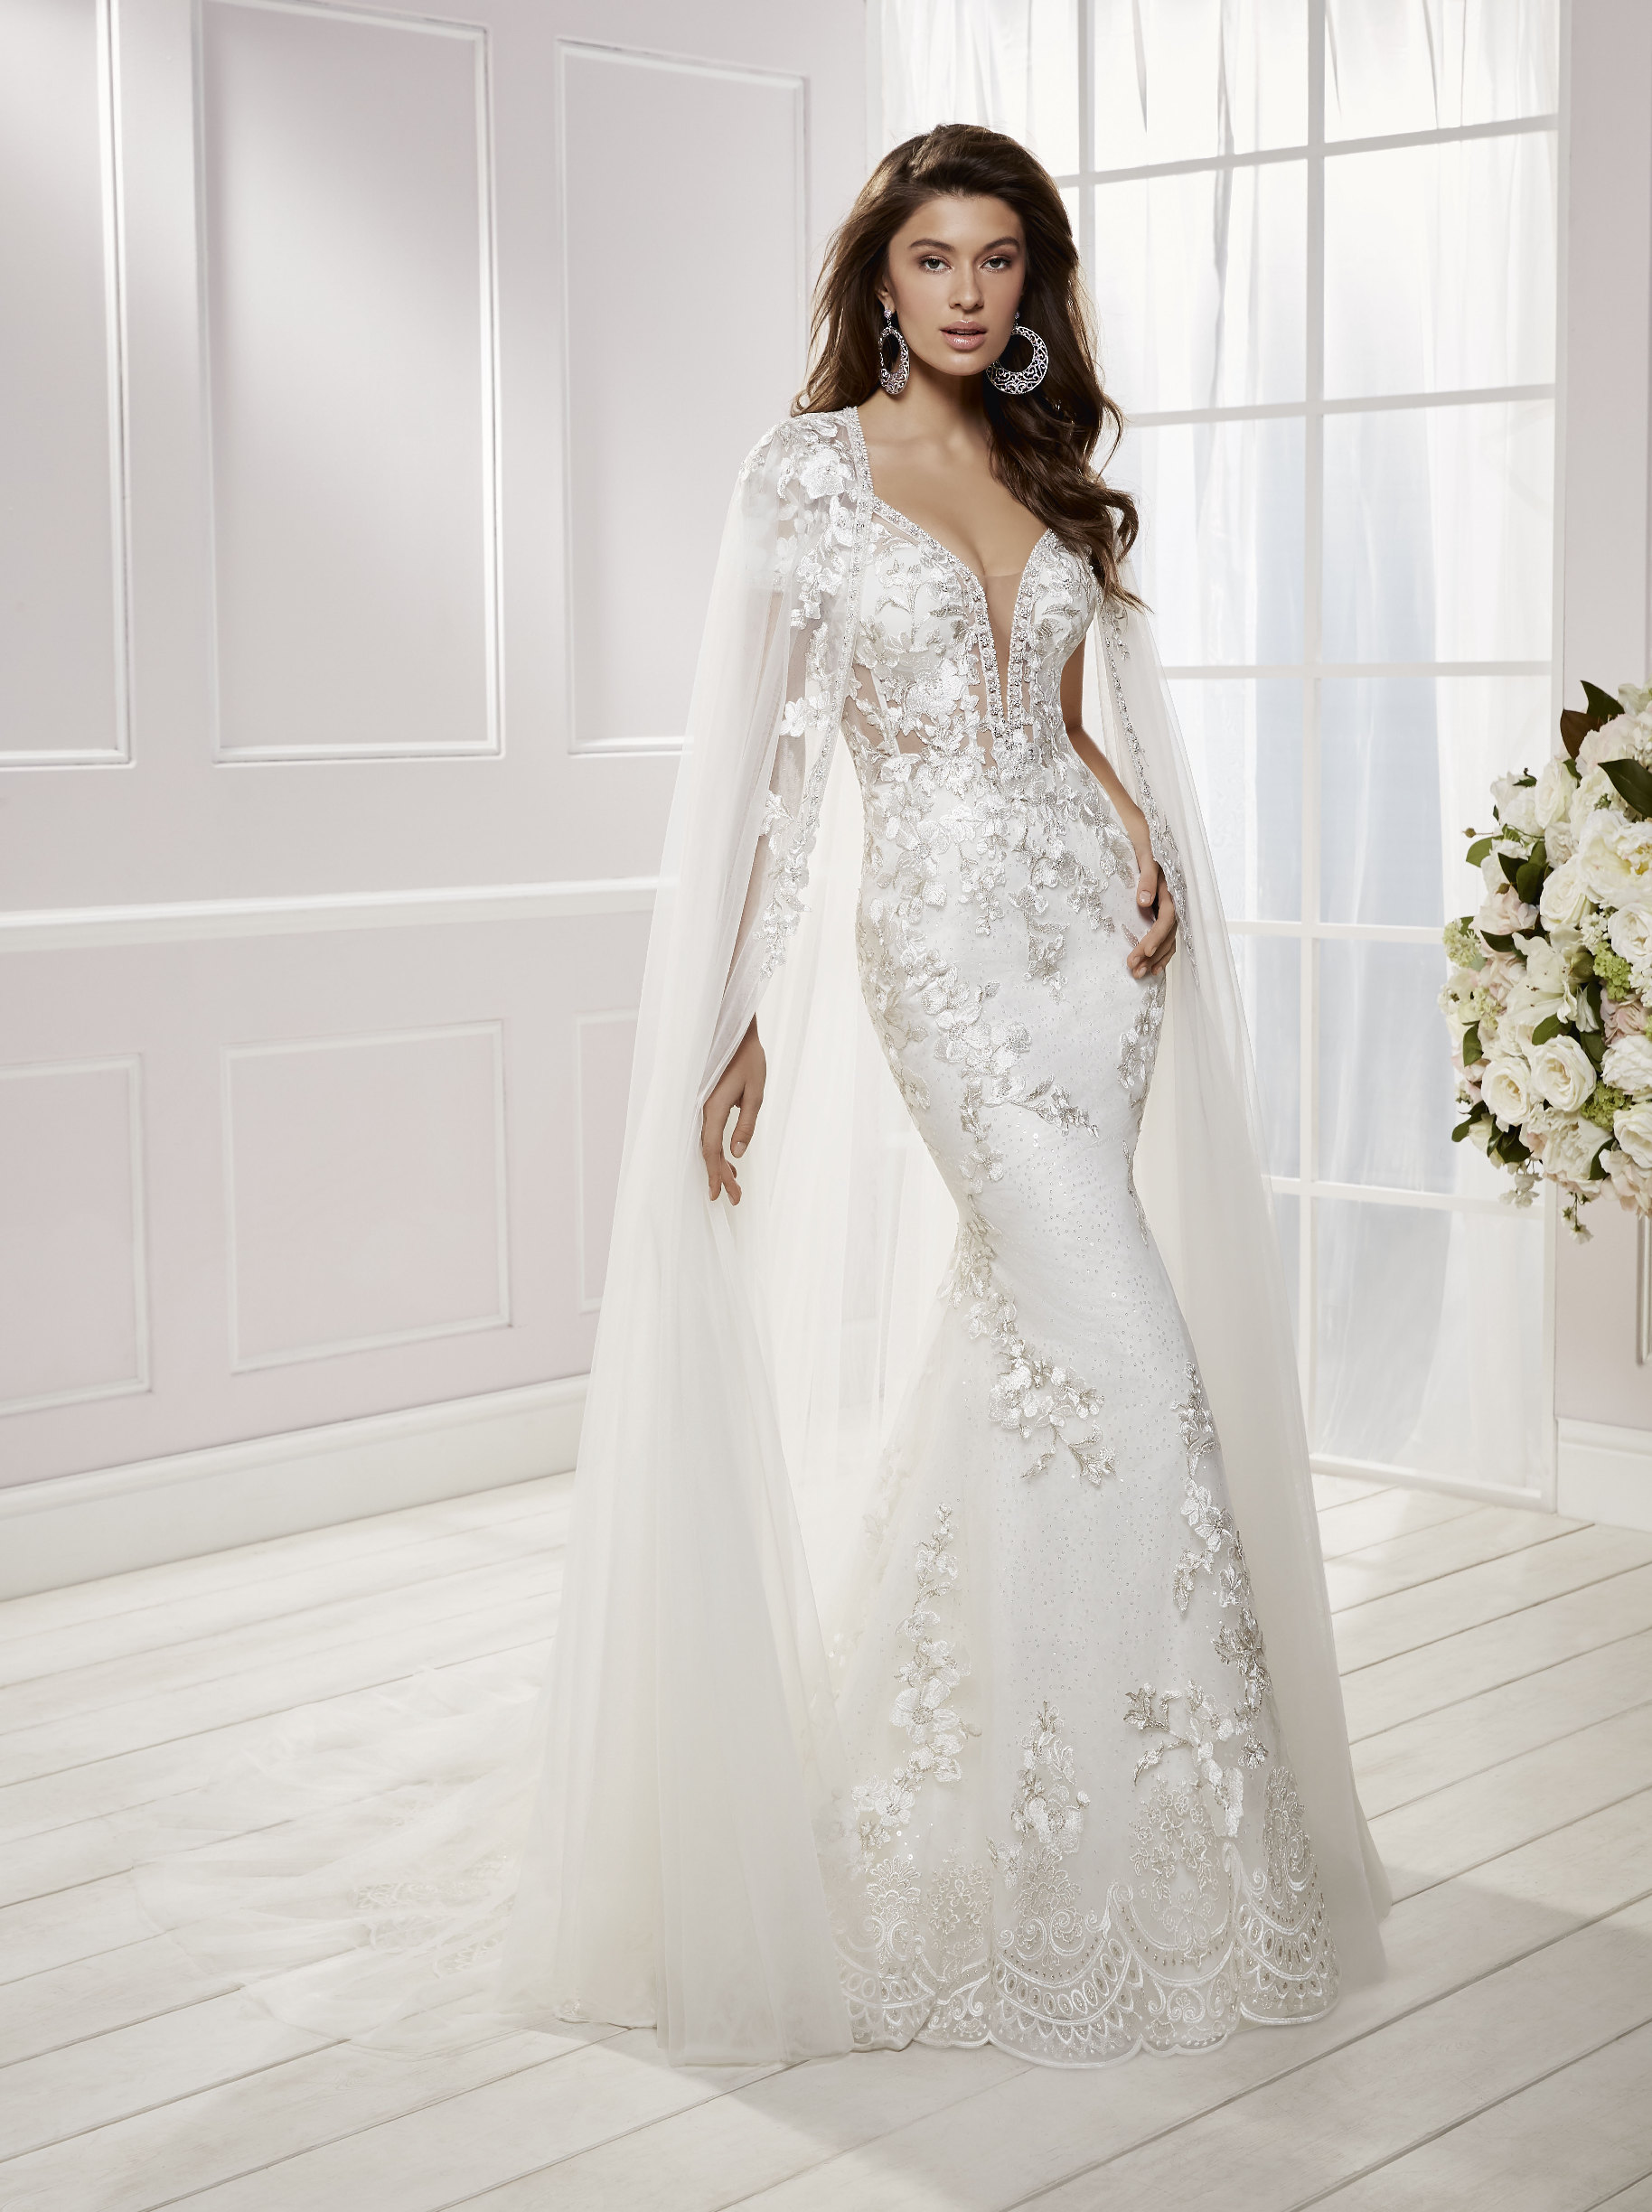 Model stood in a white room near cream flowers in Ronald Joyce 69454, a floral applique fit and flare wedding dress with cap sleeves, a plunging neckline, sparkle trim and cape